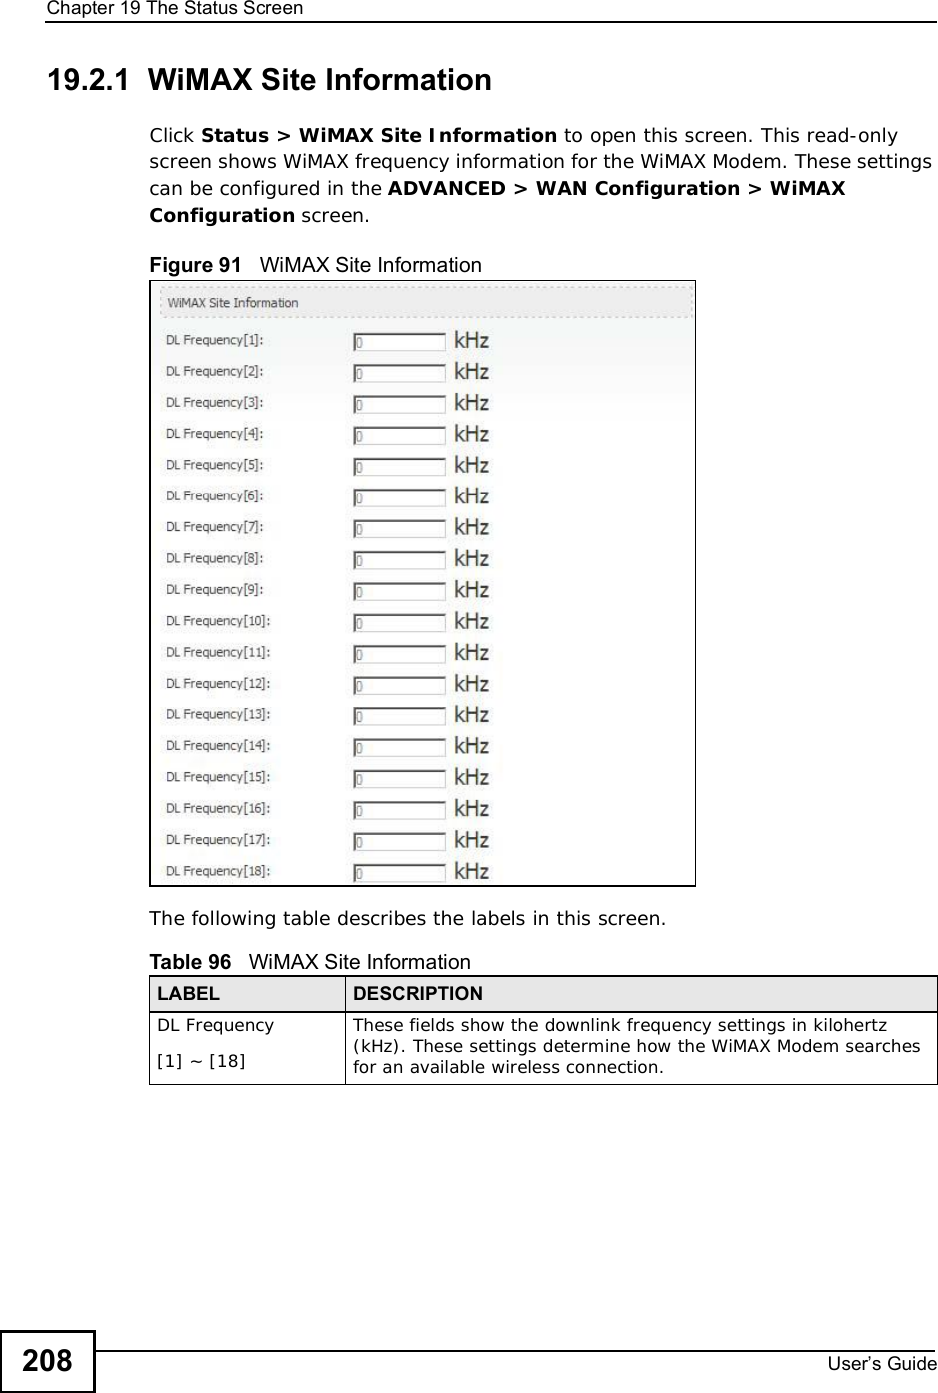 Chapter 19The Status ScreenUser s Guide20819.2.1  WiMAX Site InformationClick Status &gt; WiMAX Site Information to open this screen. This read-only screen shows WiMAX frequency information for the WiMAX Modem. These settings can be configured in the ADVANCED &gt; WAN Configuration &gt; WiMAX Configuration screen.Figure 91   WiMAX Site Information The following table describes the labels in this screen. Table 96   WiMAX Site InformationLABEL DESCRIPTIONDL Frequency[1] ~ [18]These fields show the downlink frequency settings in kilohertz (kHz). These settings determine how the WiMAX Modem searches for an available wireless connection.